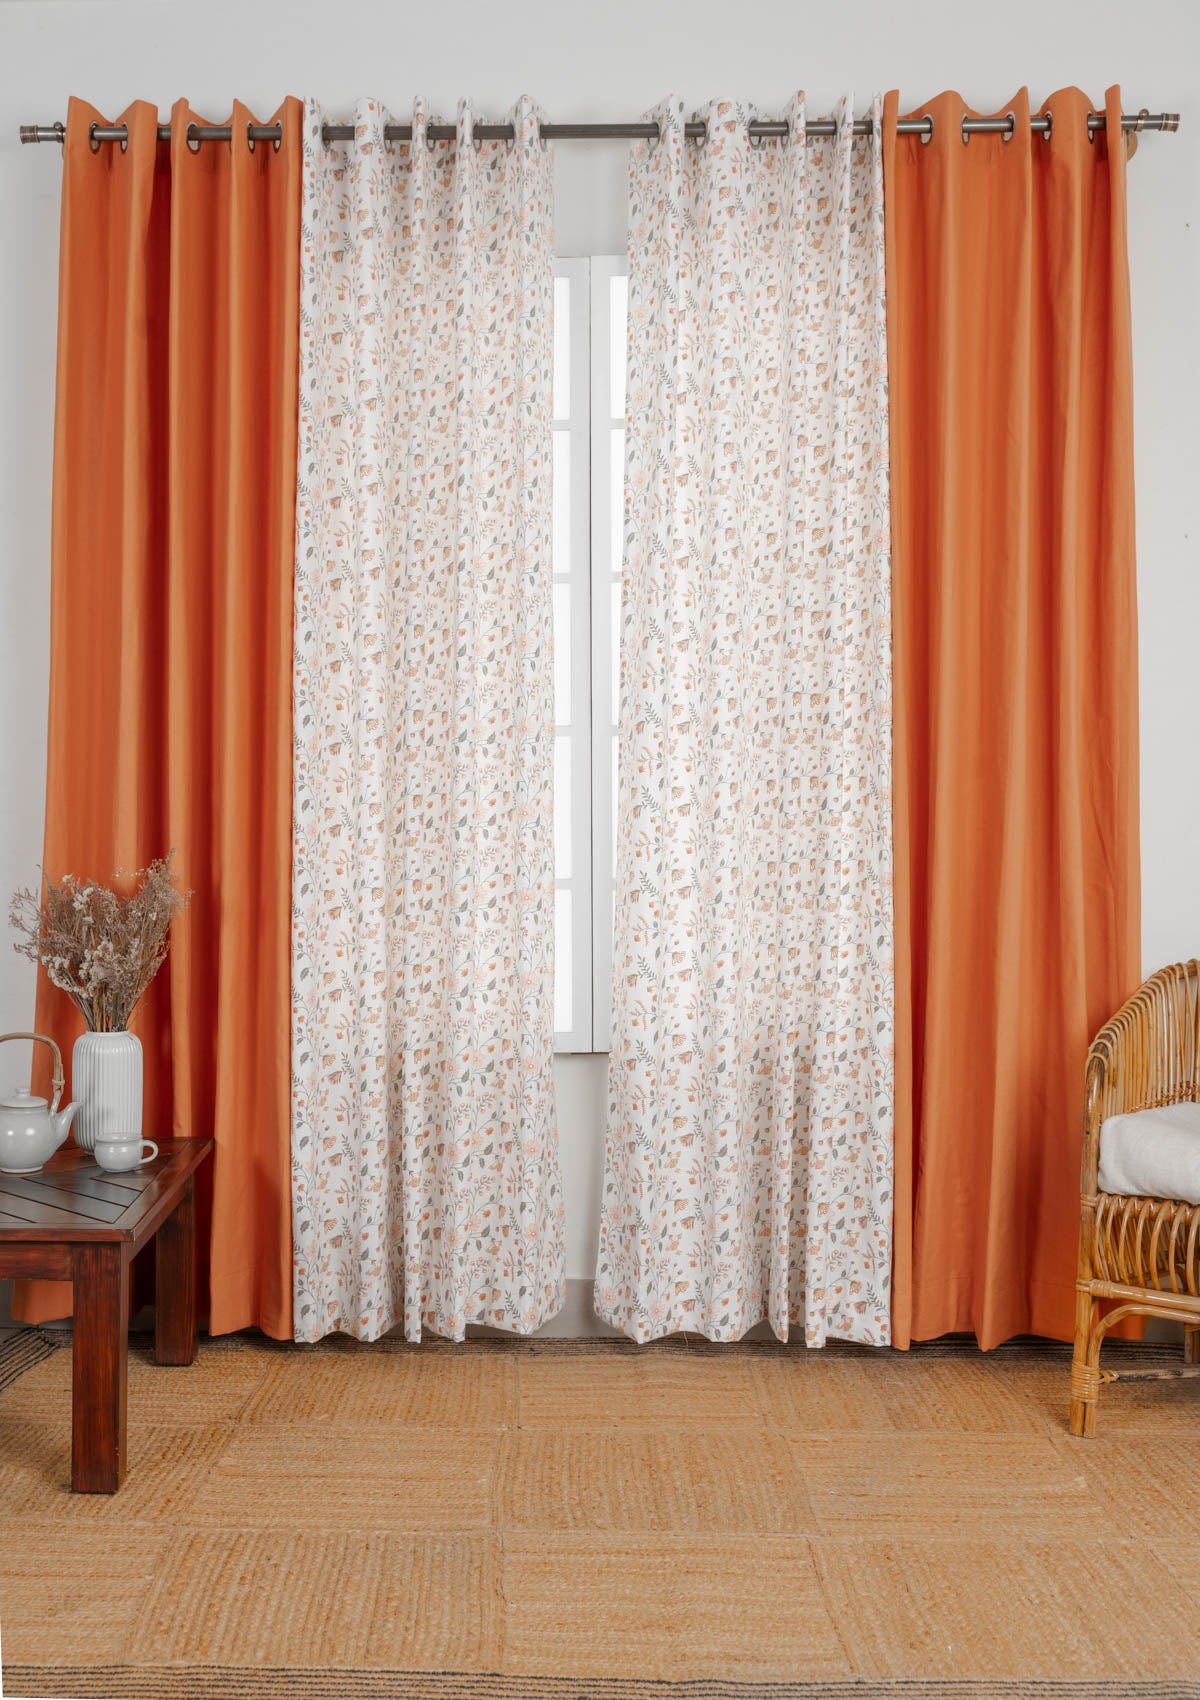 Forest bloom floral print with solid Orange 100% cotton curtains for living room - Set of 4